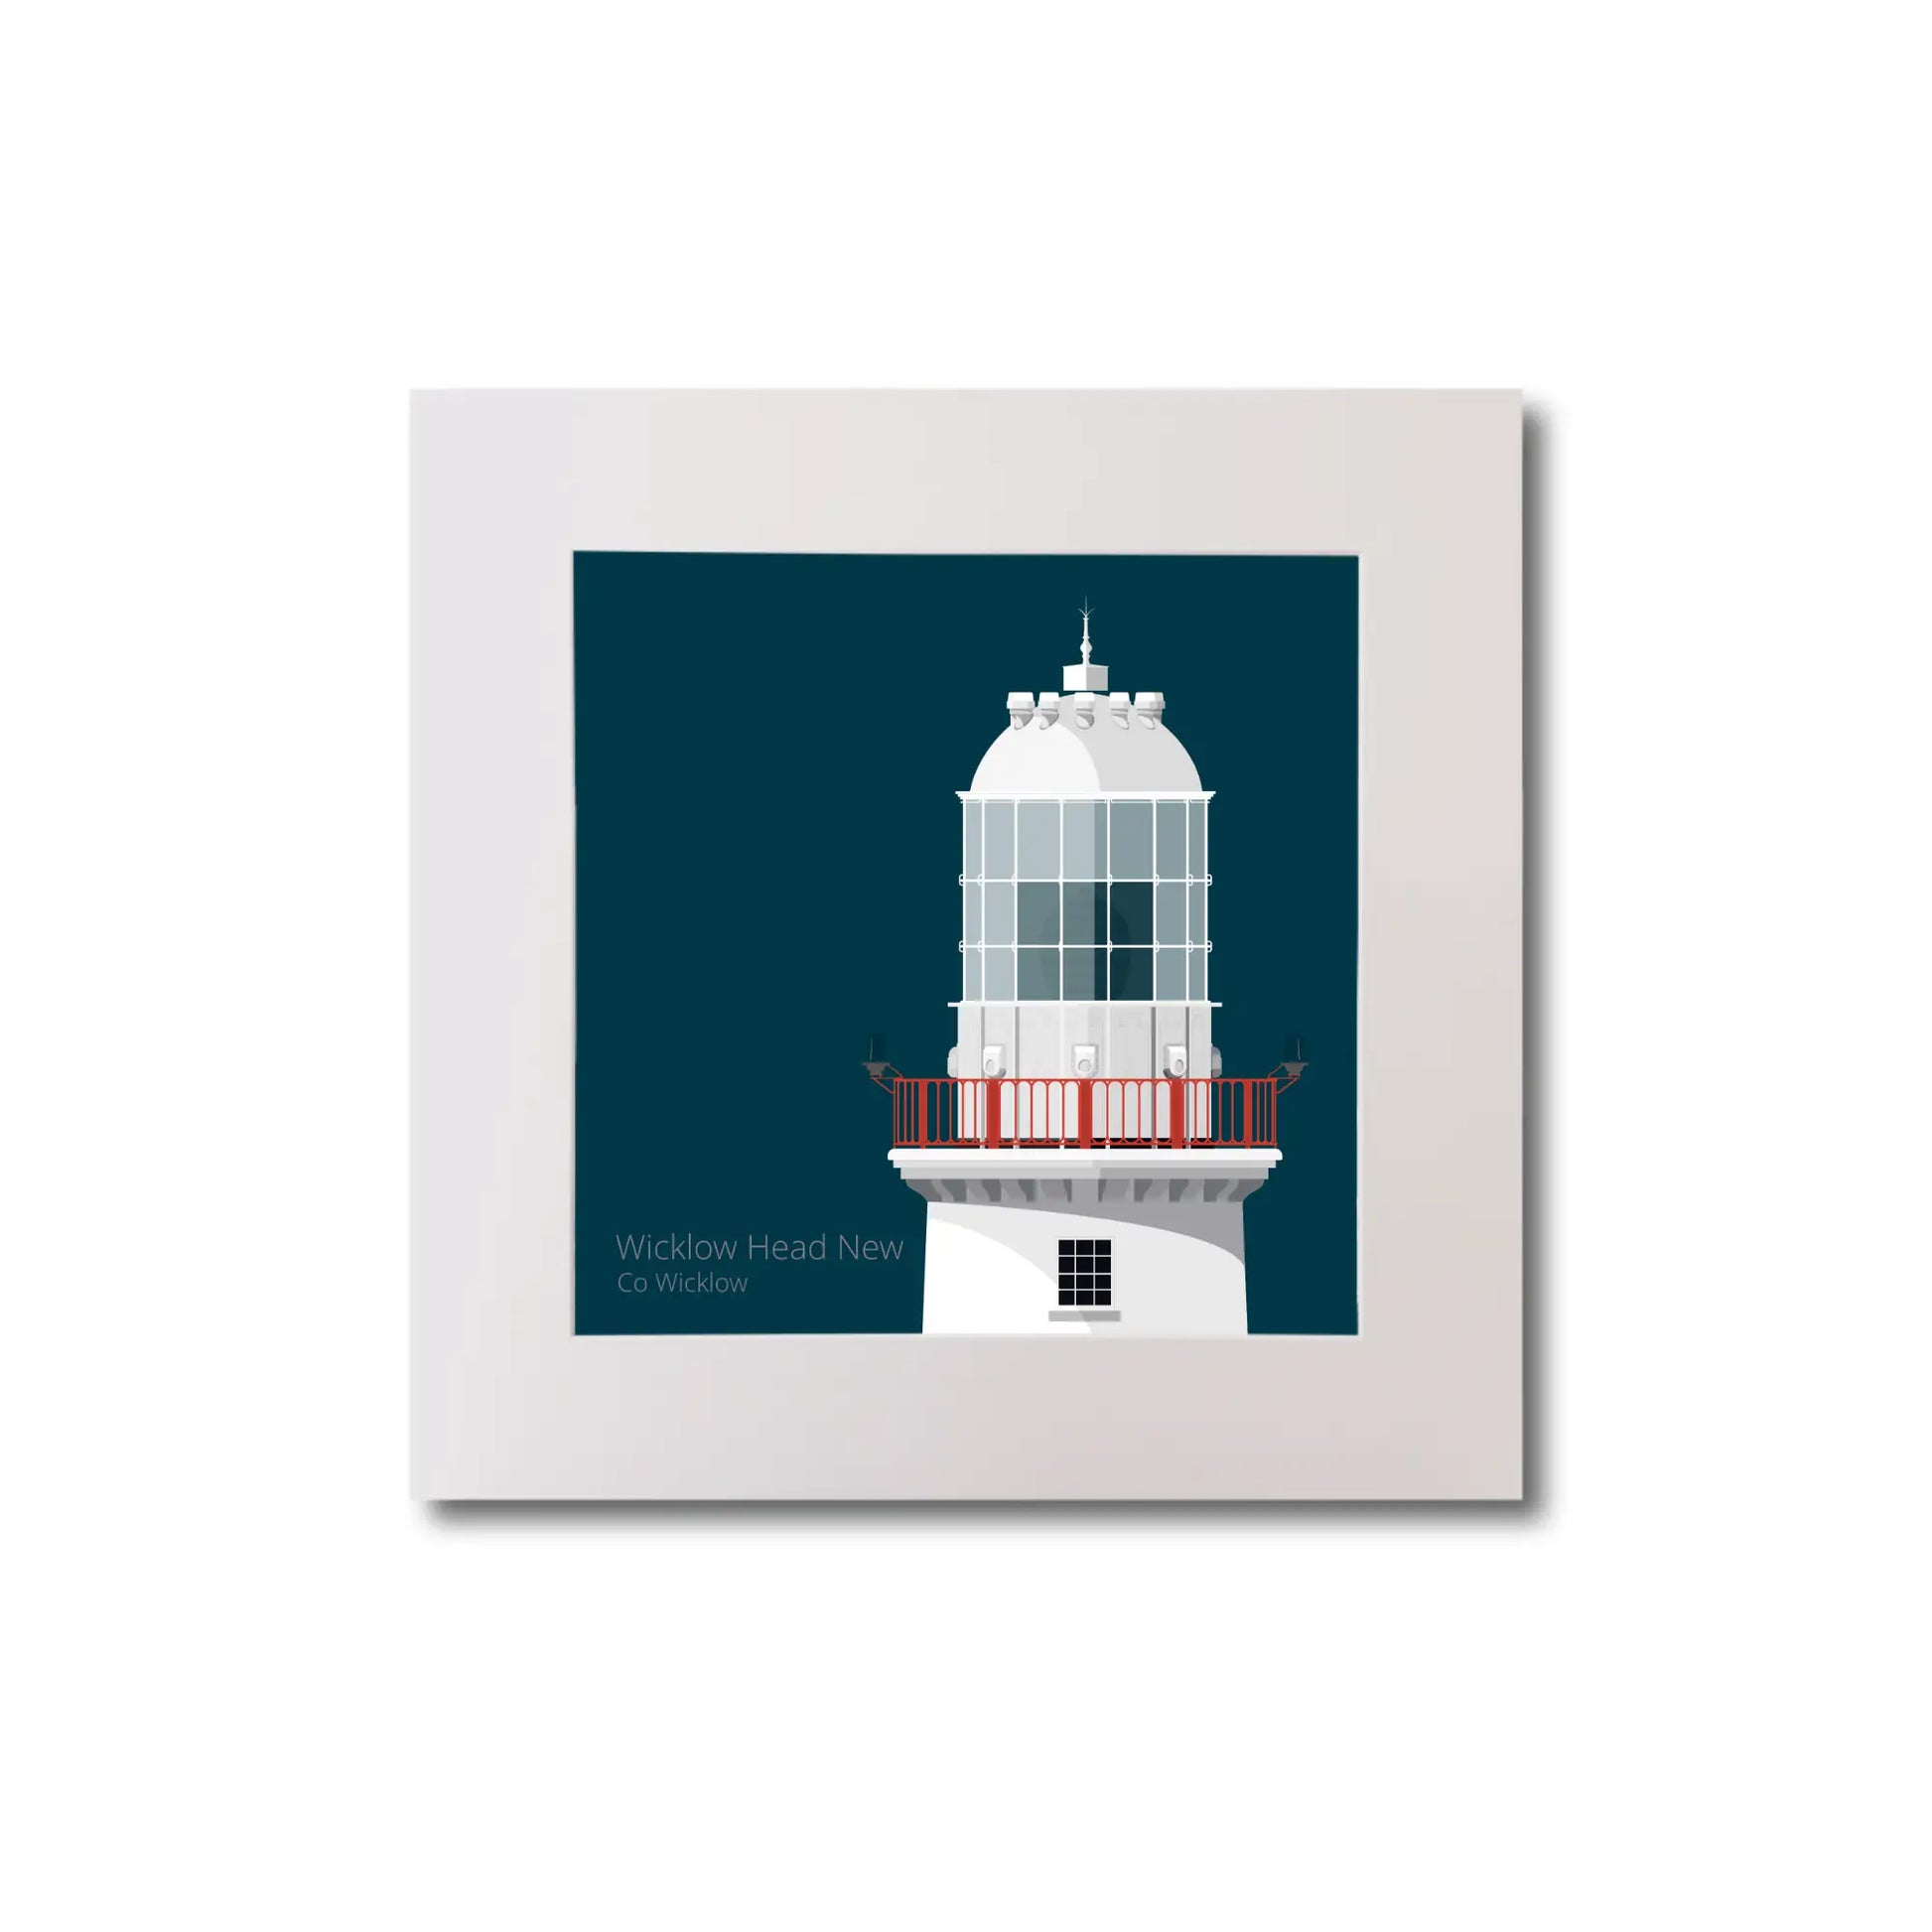 Illustration of Valentia Island lighthouse on a midnight blue background, mounted and measuring 20x20cm.